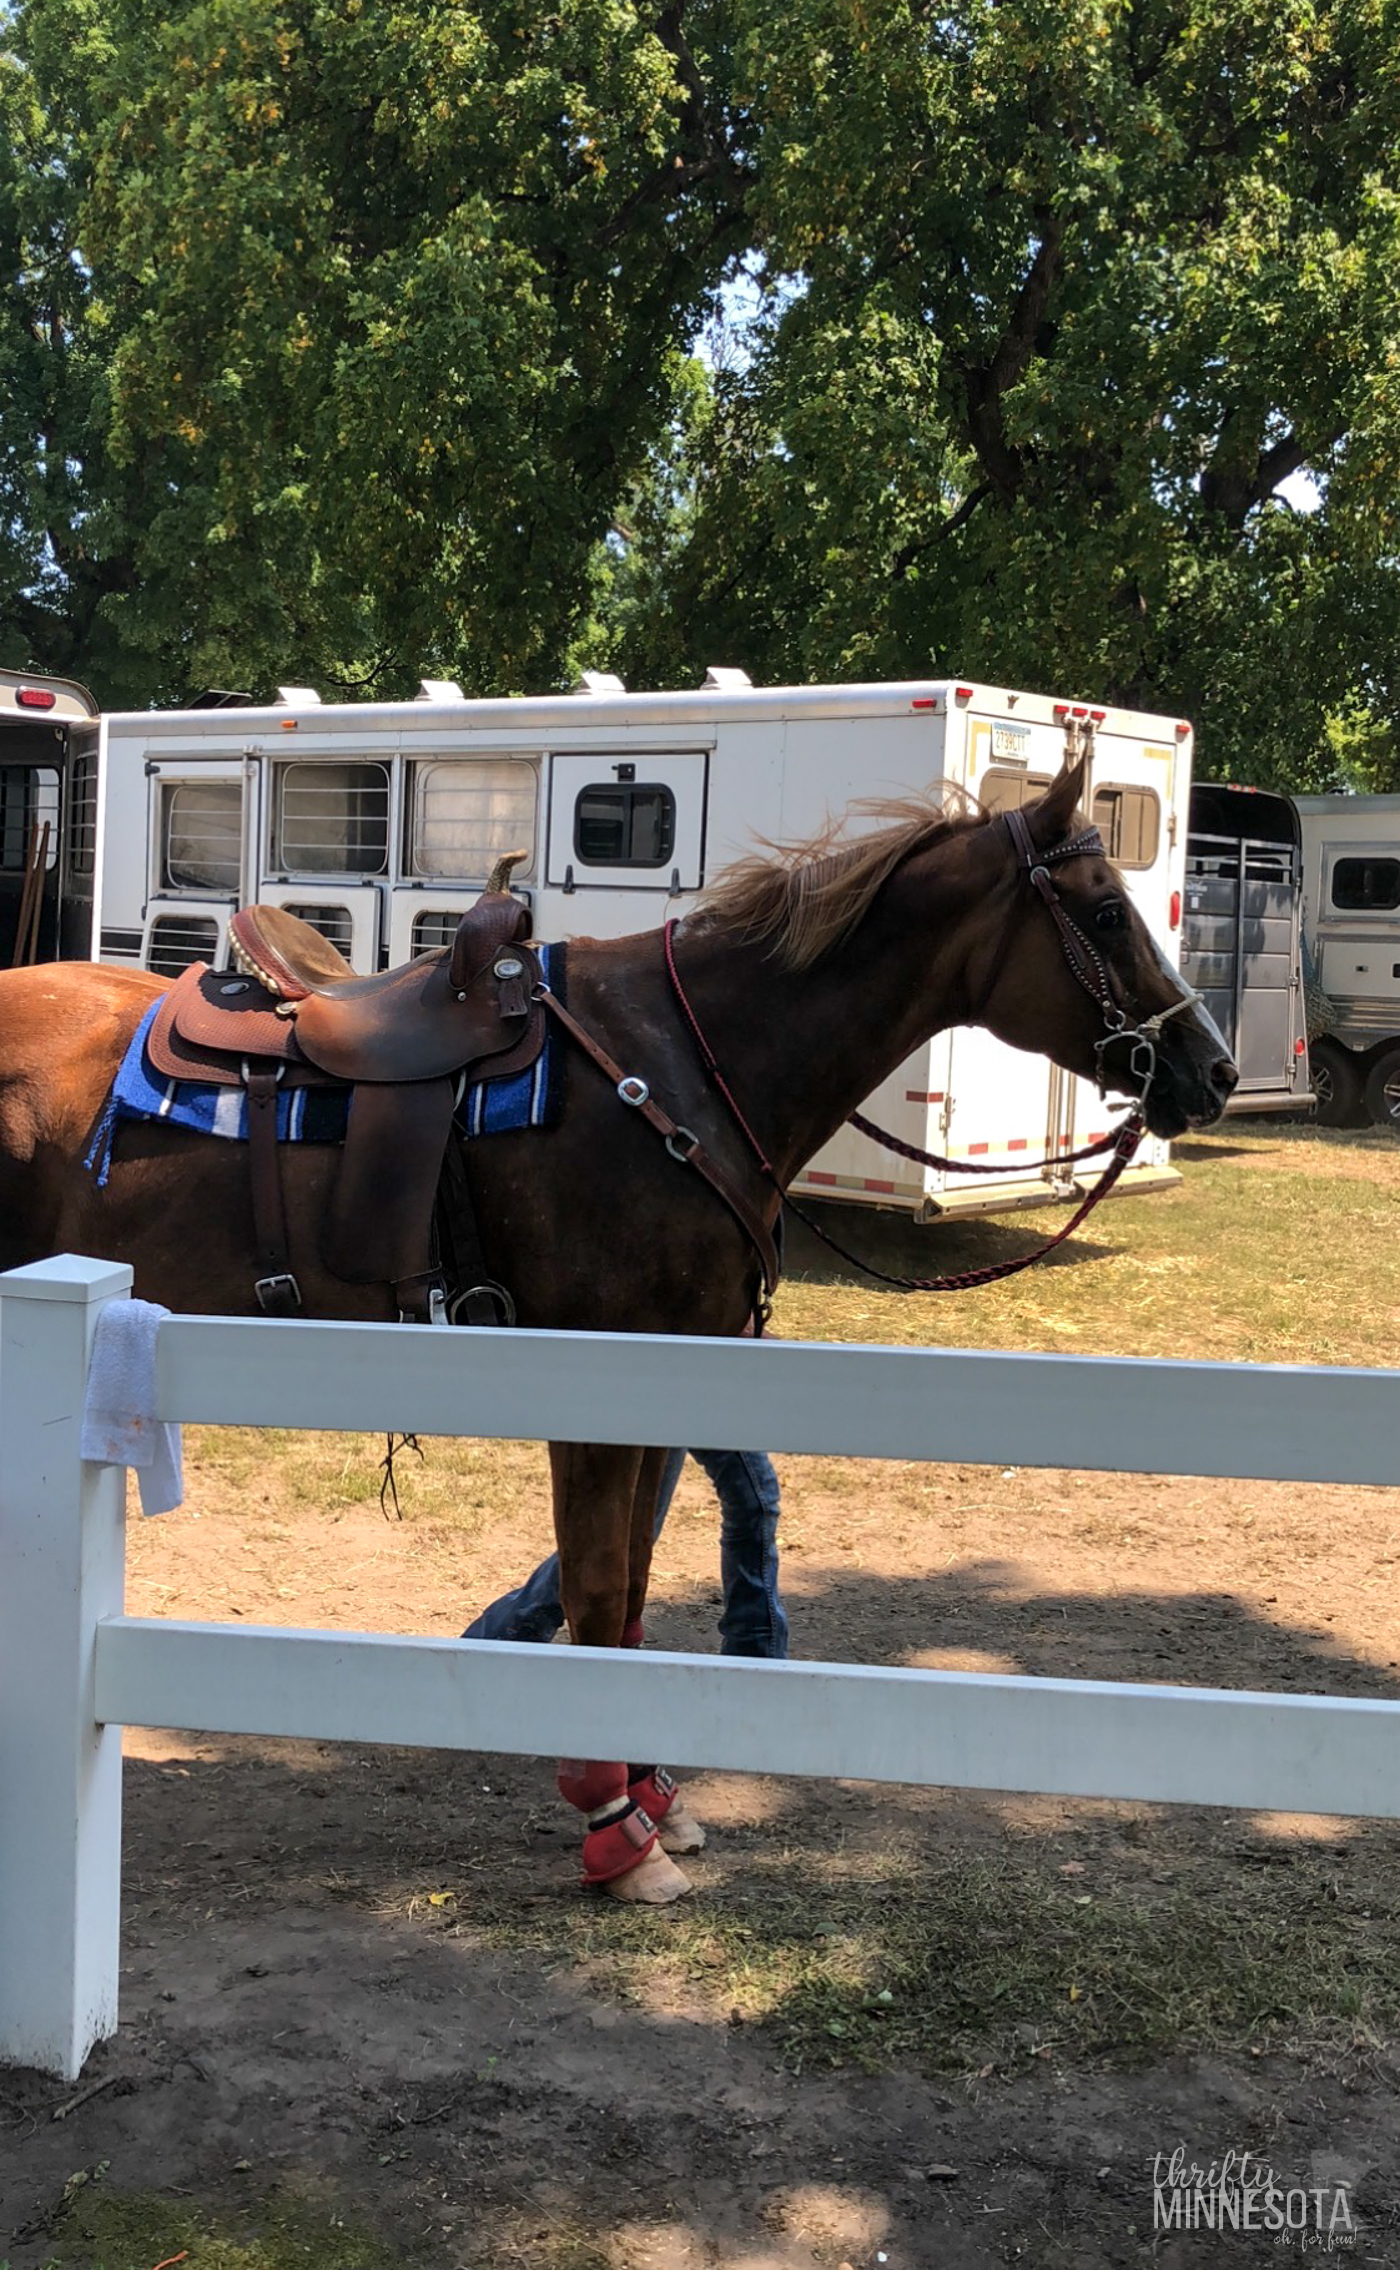 Horse in front of horse trailer at county fair